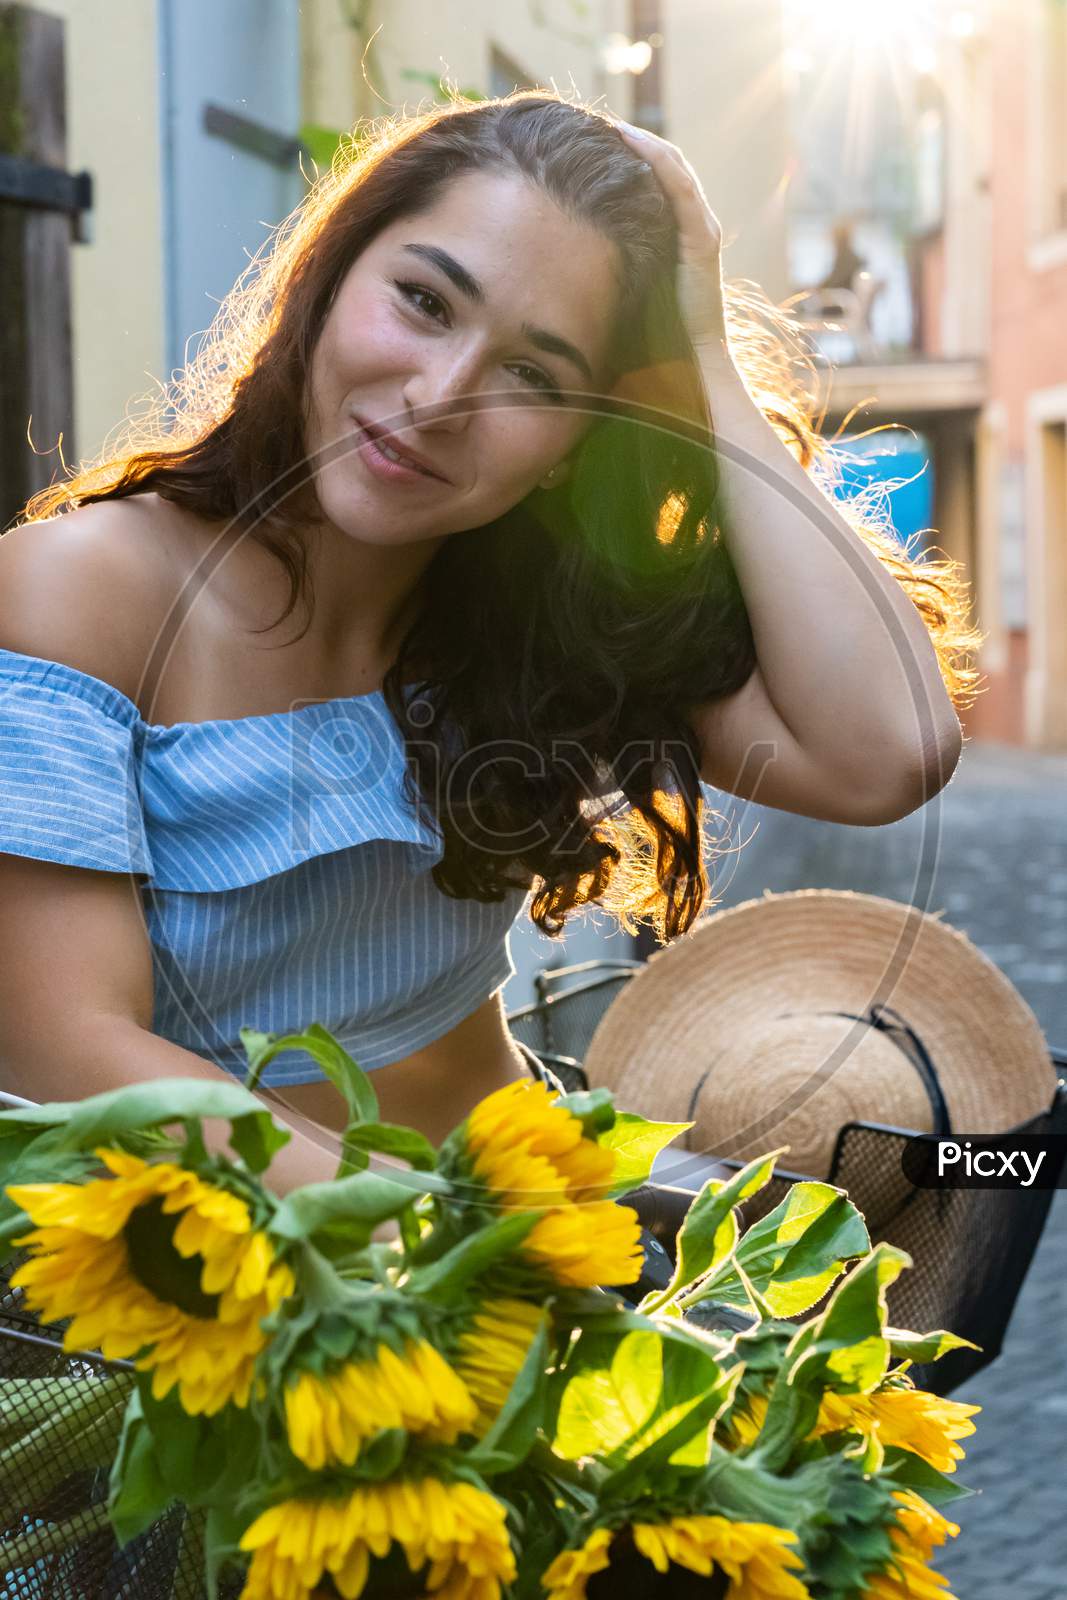 Beautiful Young Lady Walking Through The Old City While Pushing Her Turquoise Bicycle With Sunflowers In A Basket. Sunbeam At Background.